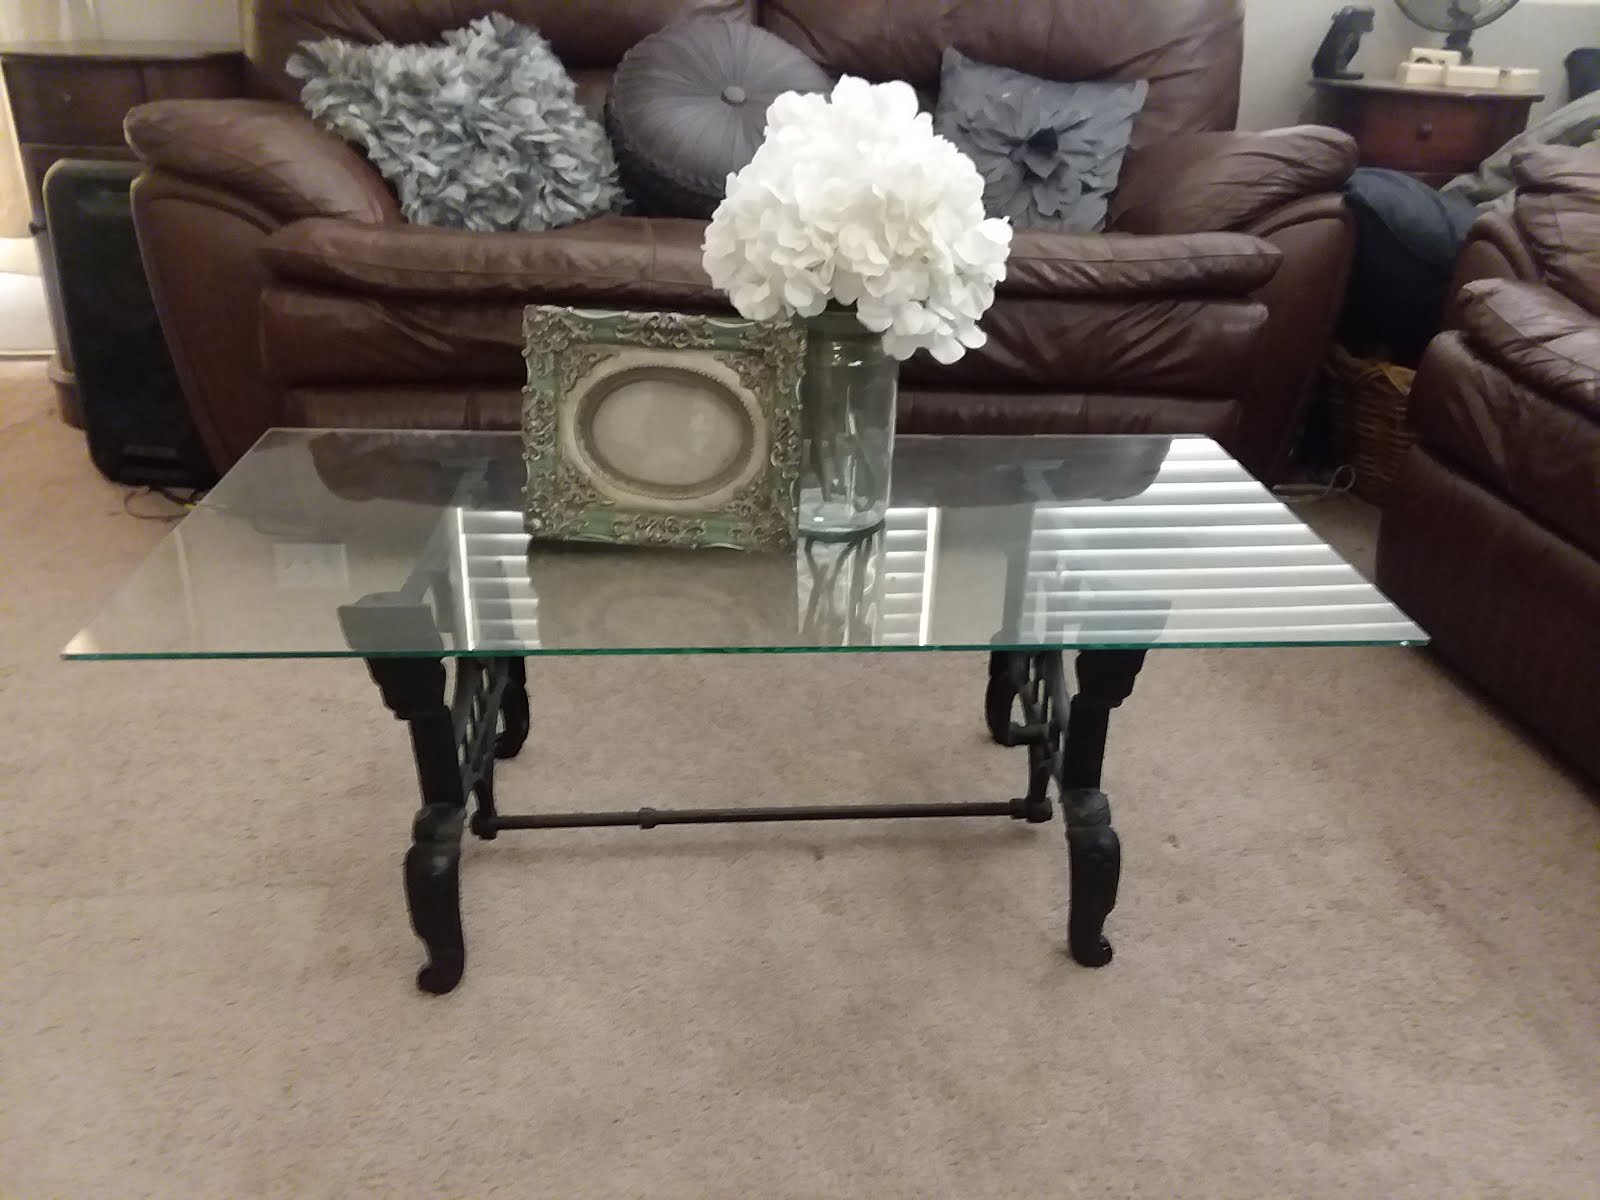 Cast iron coffee table $sold